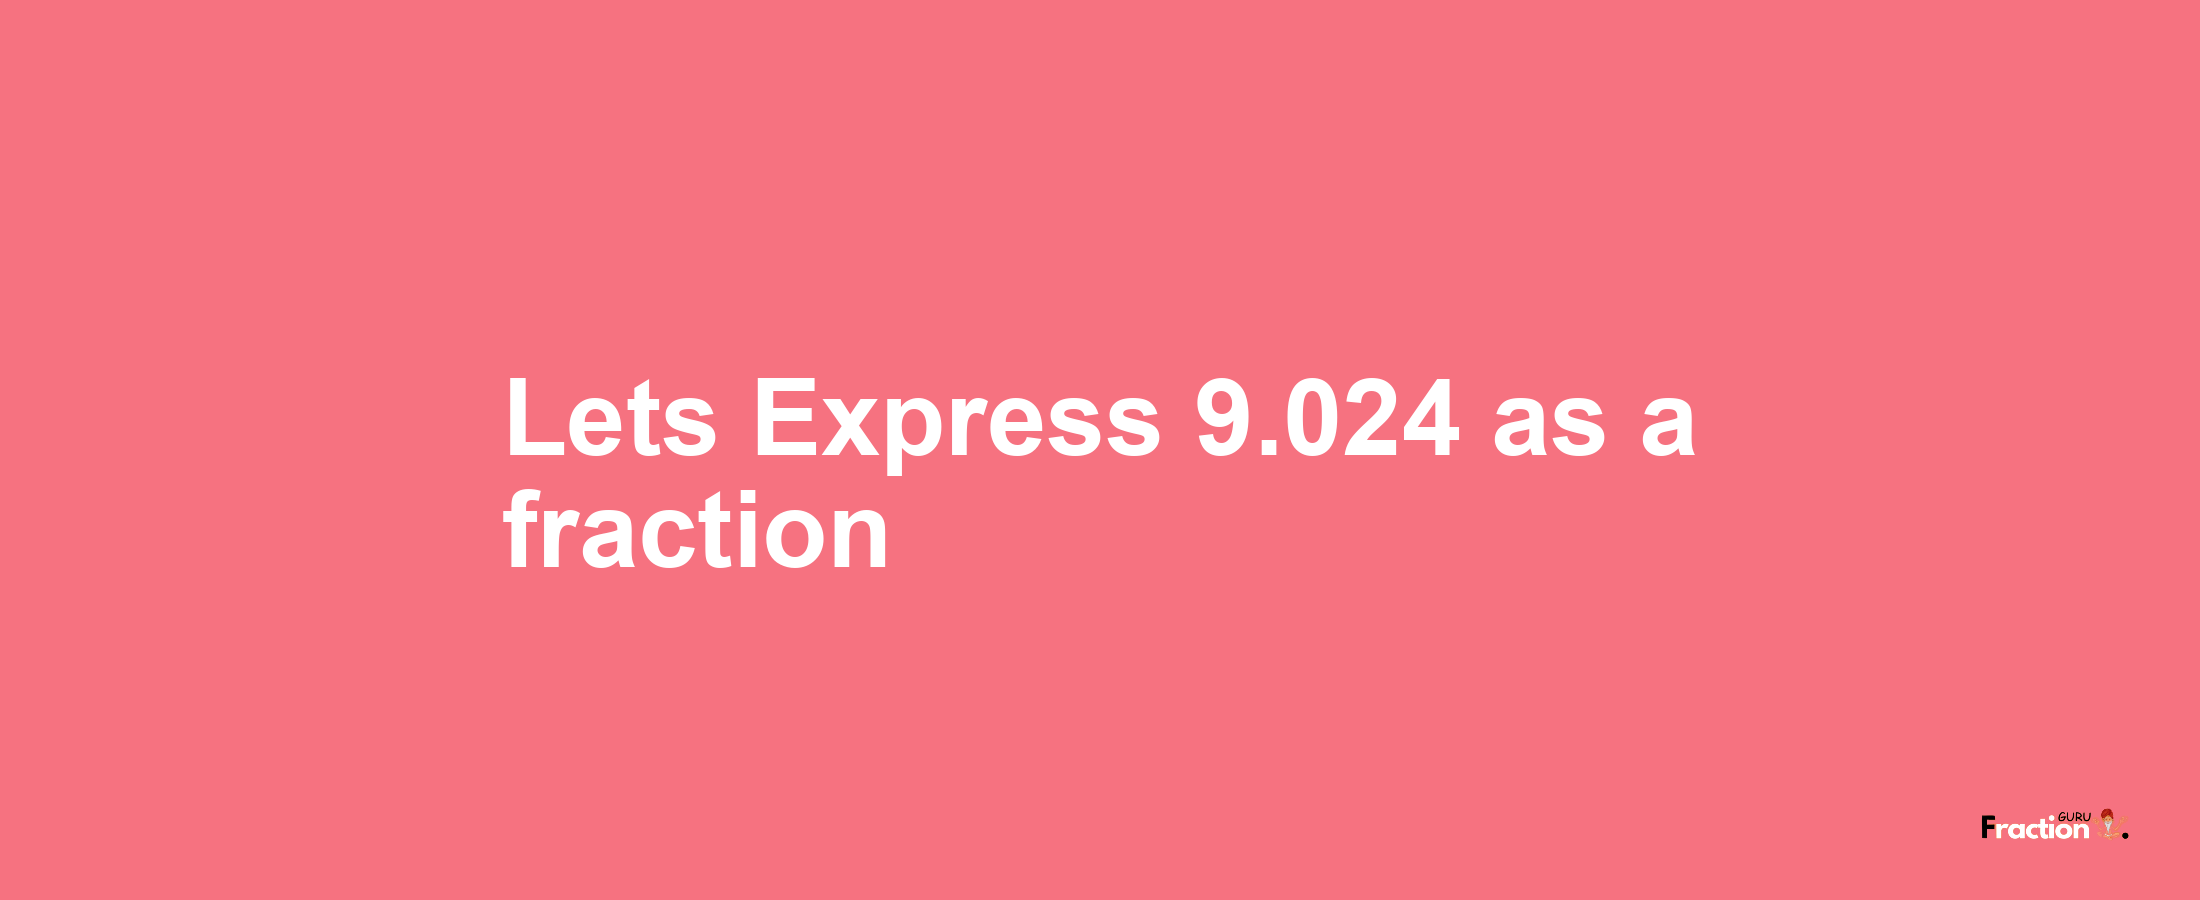 Lets Express 9.024 as afraction